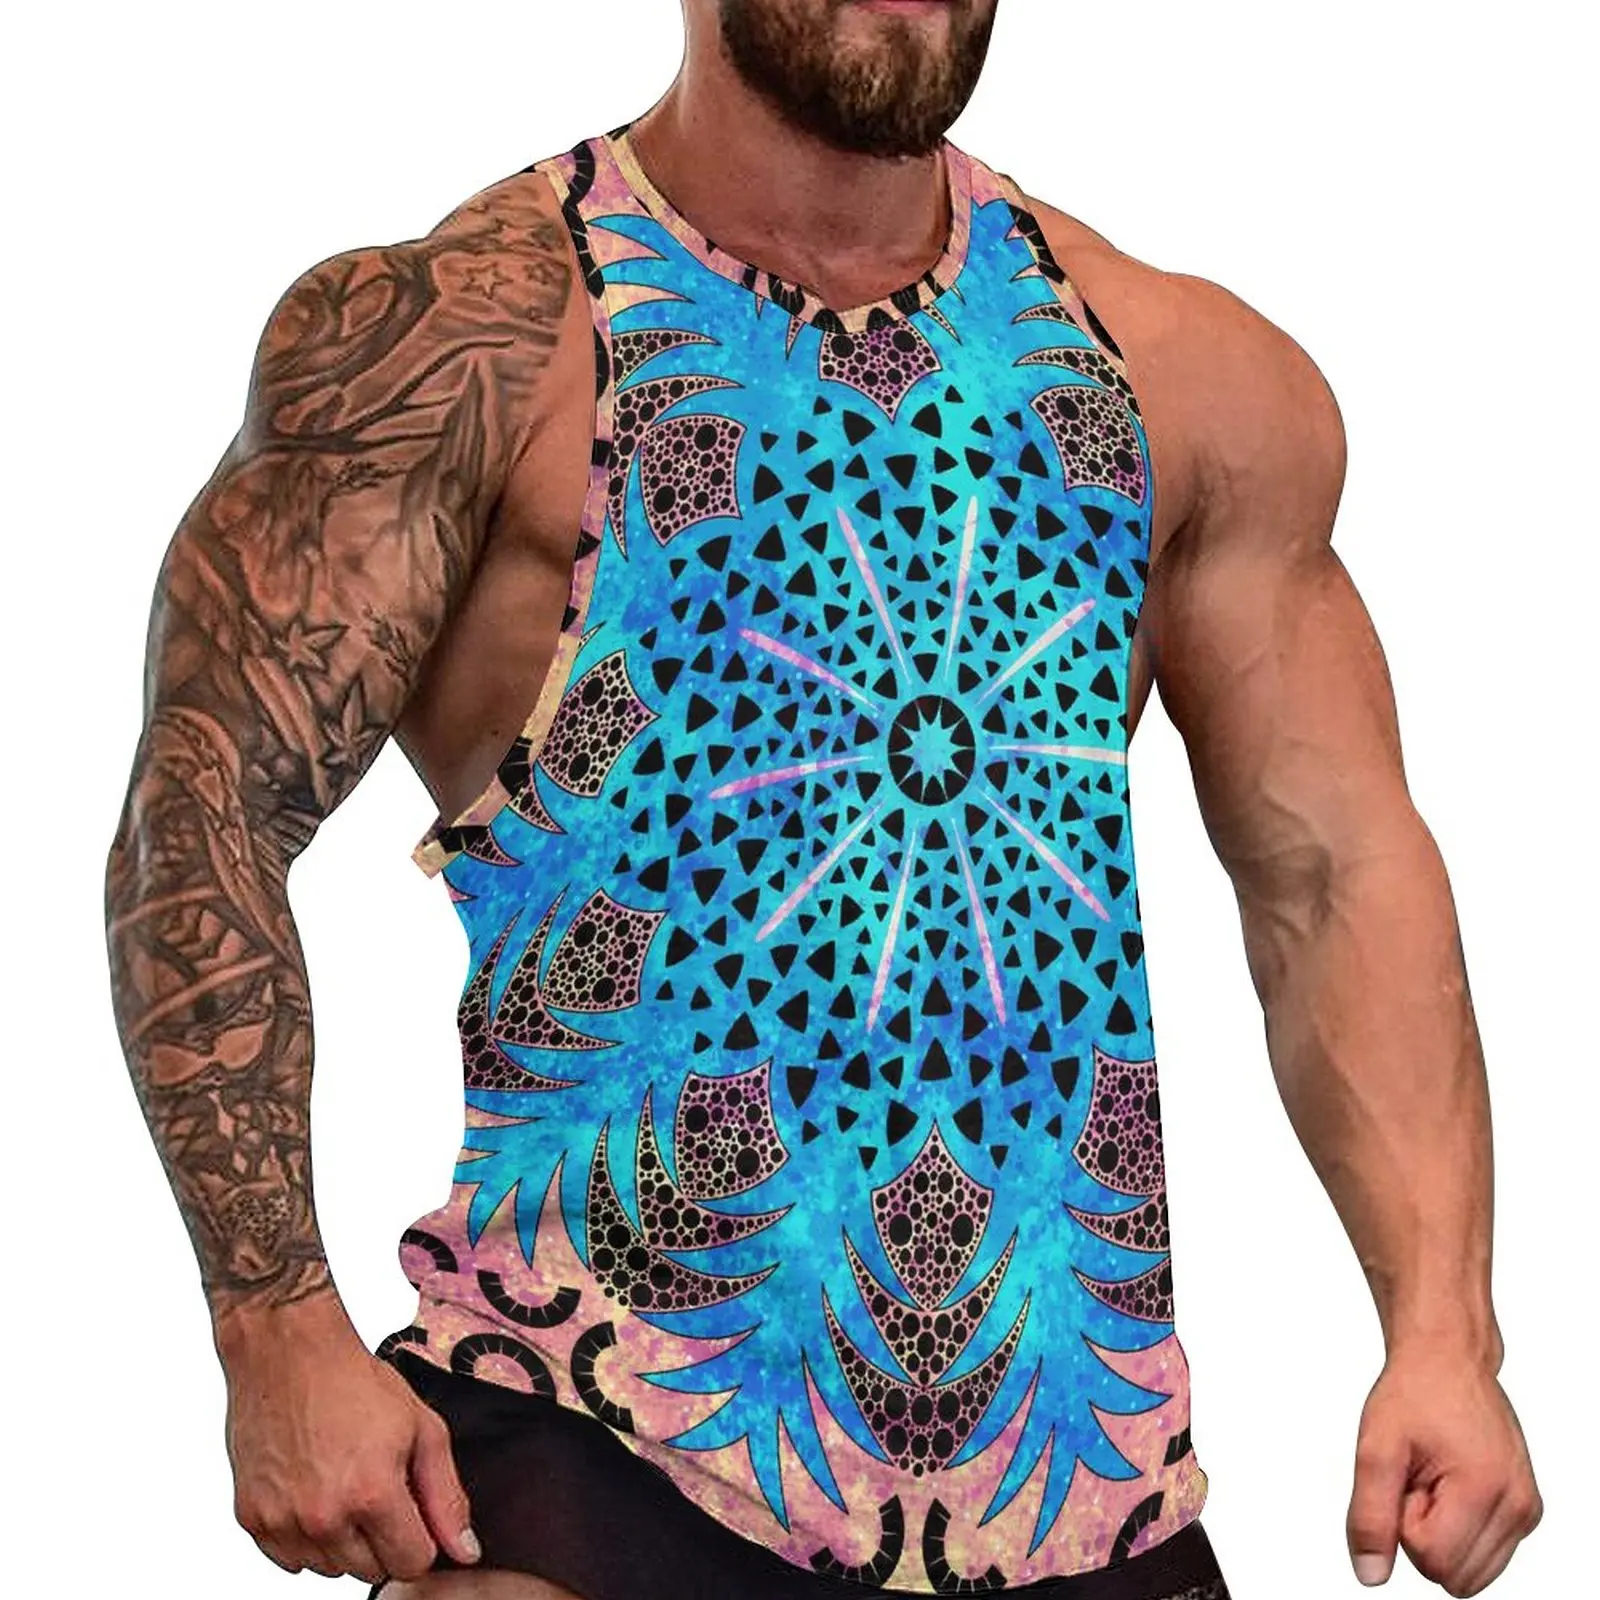 

Vibrant Mandala Tank Top Man's Blue And Pink Pineapple Muscle Tops Beach Gym Printed Sleeveless Vests Large Size 4XL 5XL